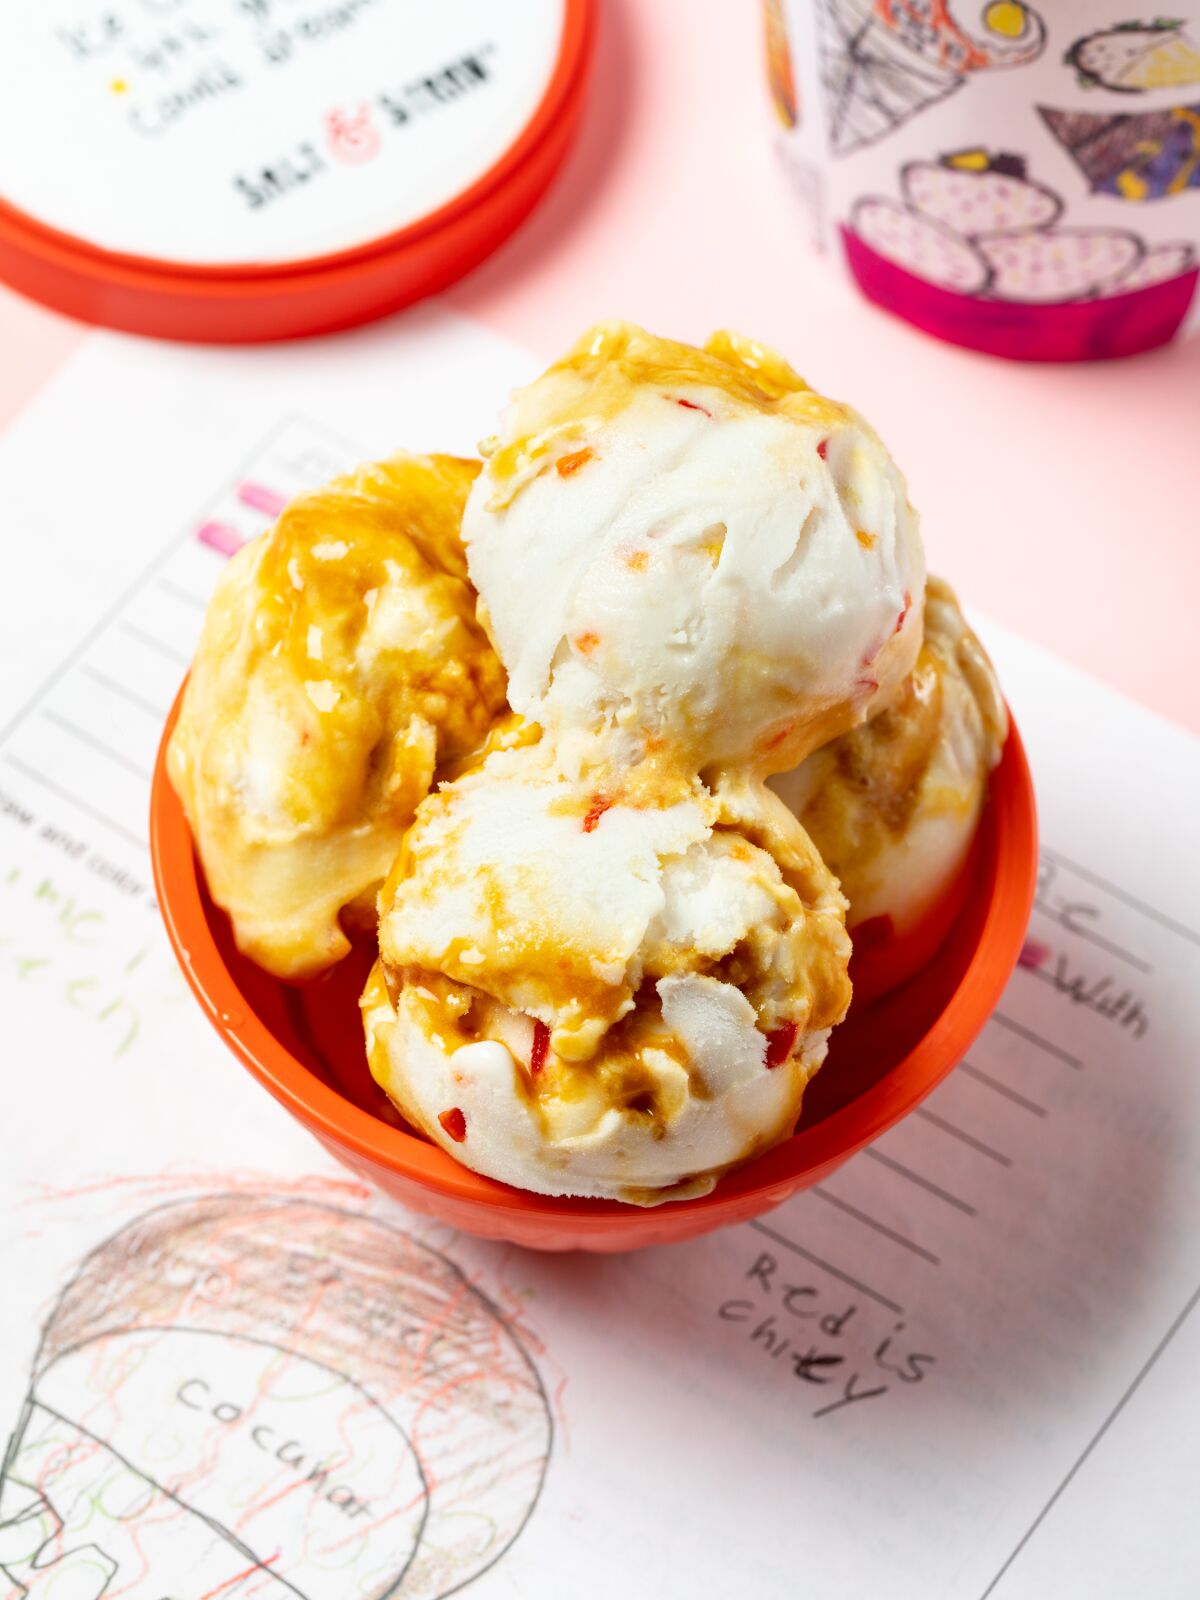 Cramel with Cocanat and Lime with Chiley ice cream, a student-invented (and -spelled) flavor at Salt & Straw ice cream shops in San Diego Sept. 6 through Oct. 4.